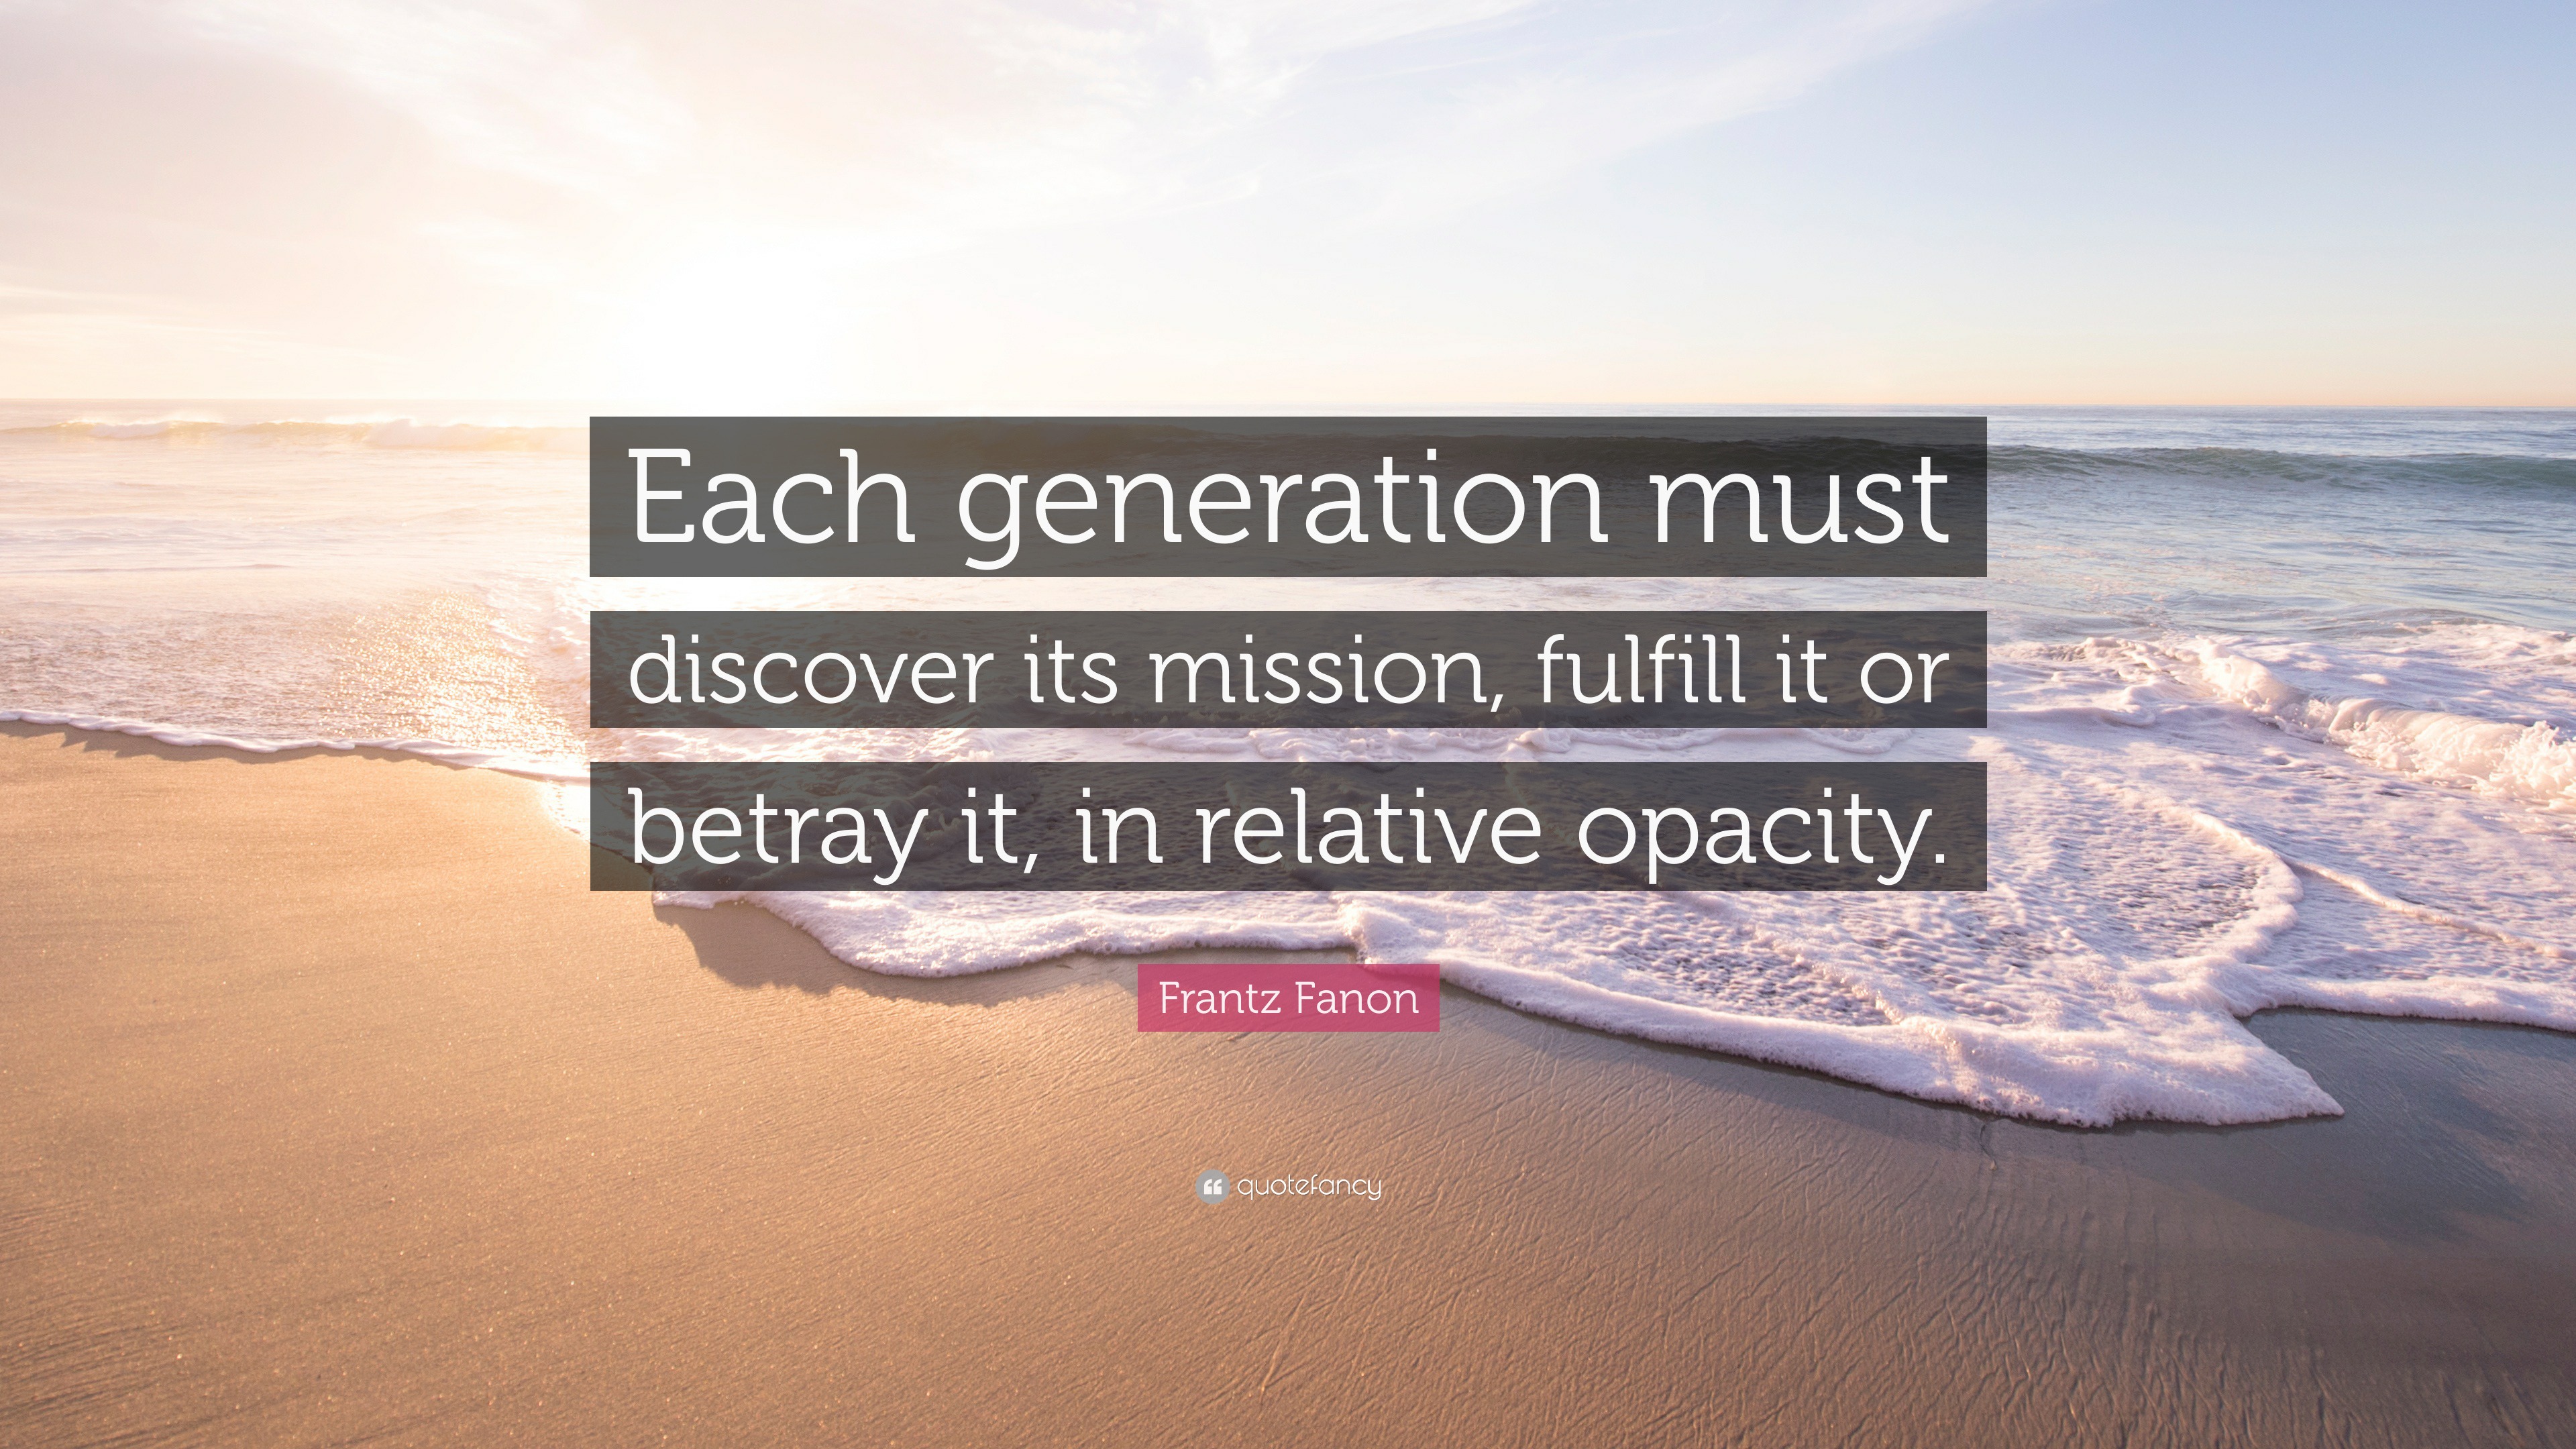 Frantz Fanon Quote: “Each generation must discover its mission, fulfill